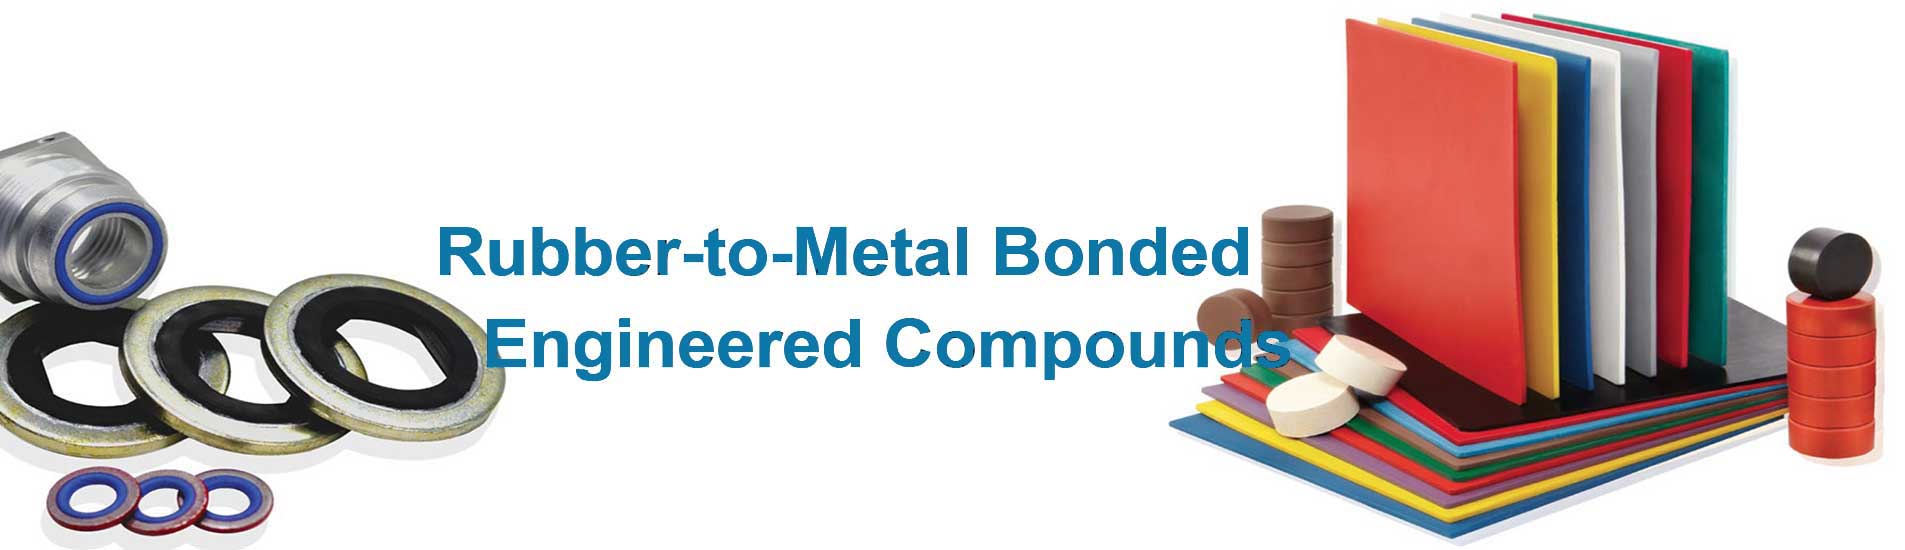 Rubber-to-Metal Bonded Engineered Compounds